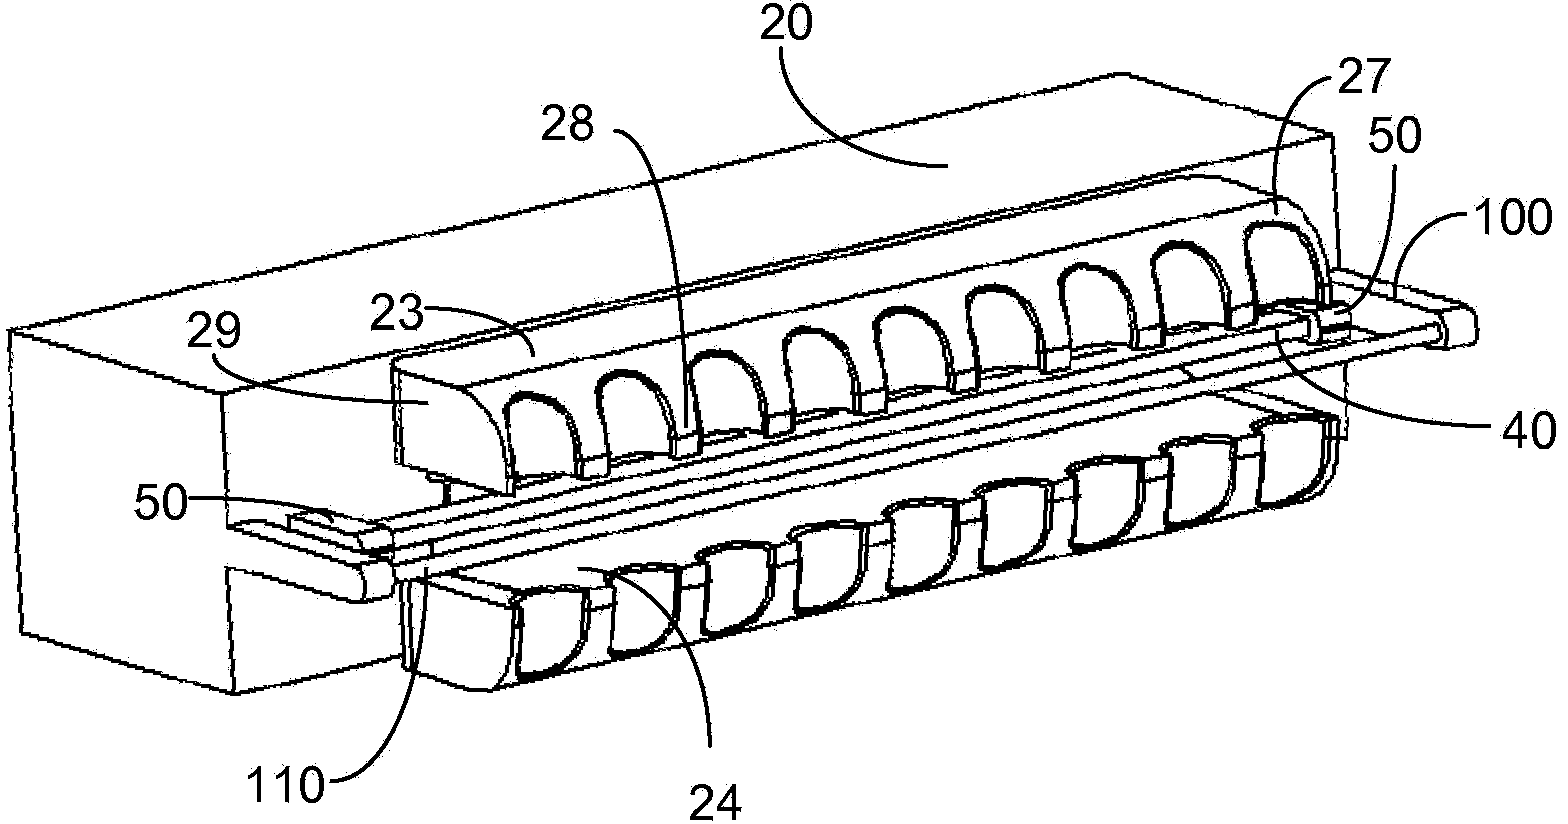 Hair removal and re-growth suppression apparatus